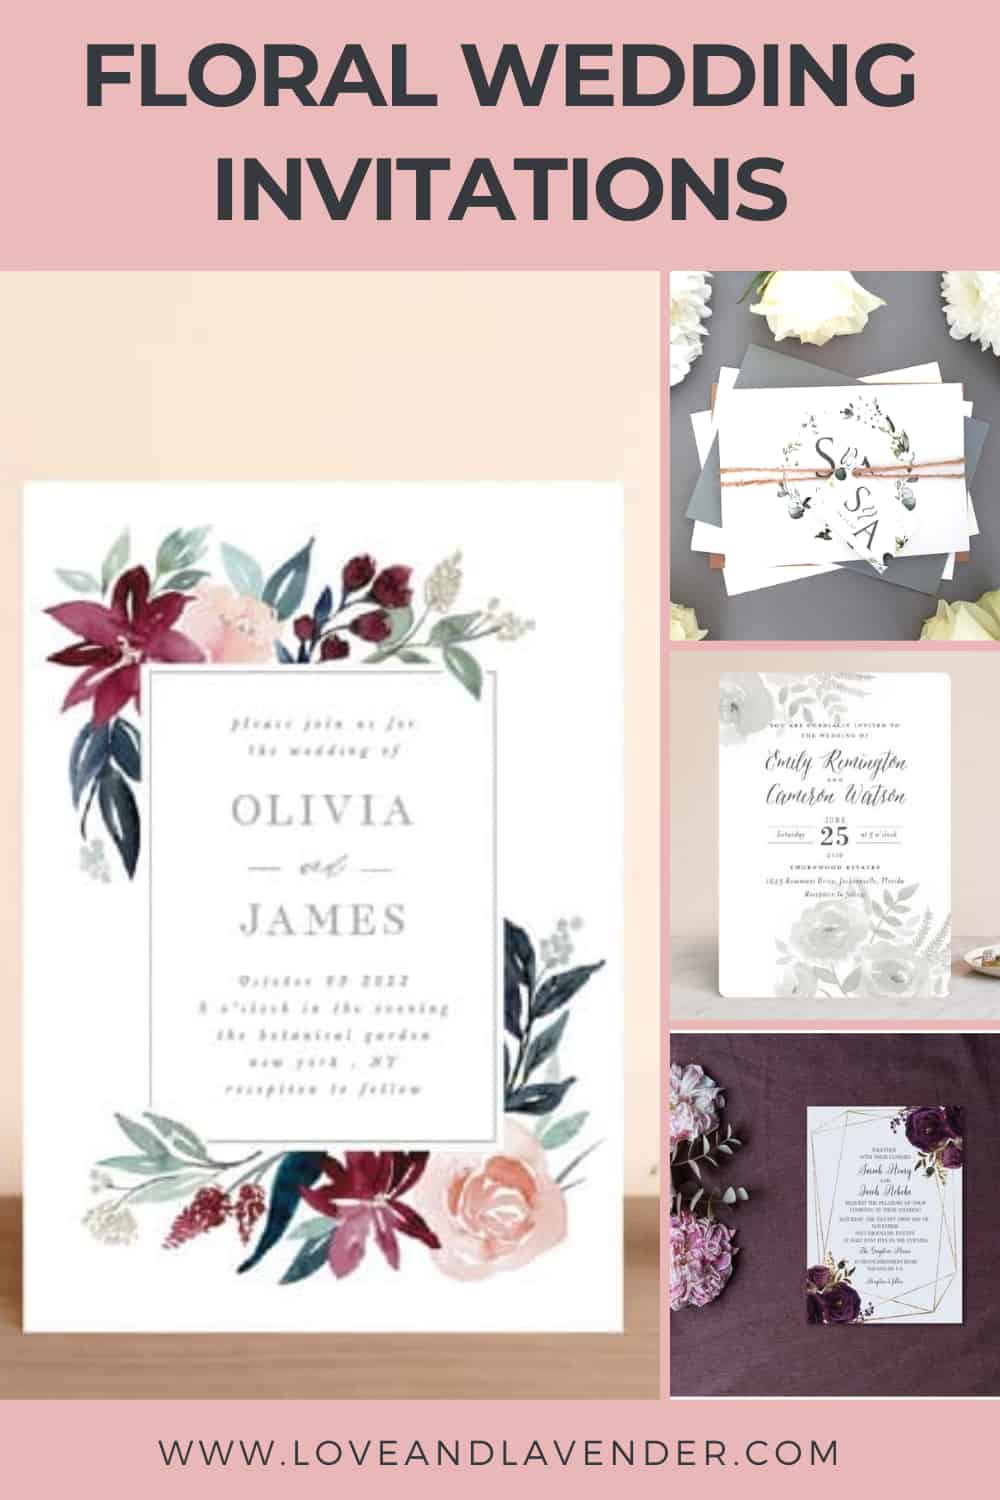 18 Gorgeous Floral Wedding Invitations To Fit Any Style